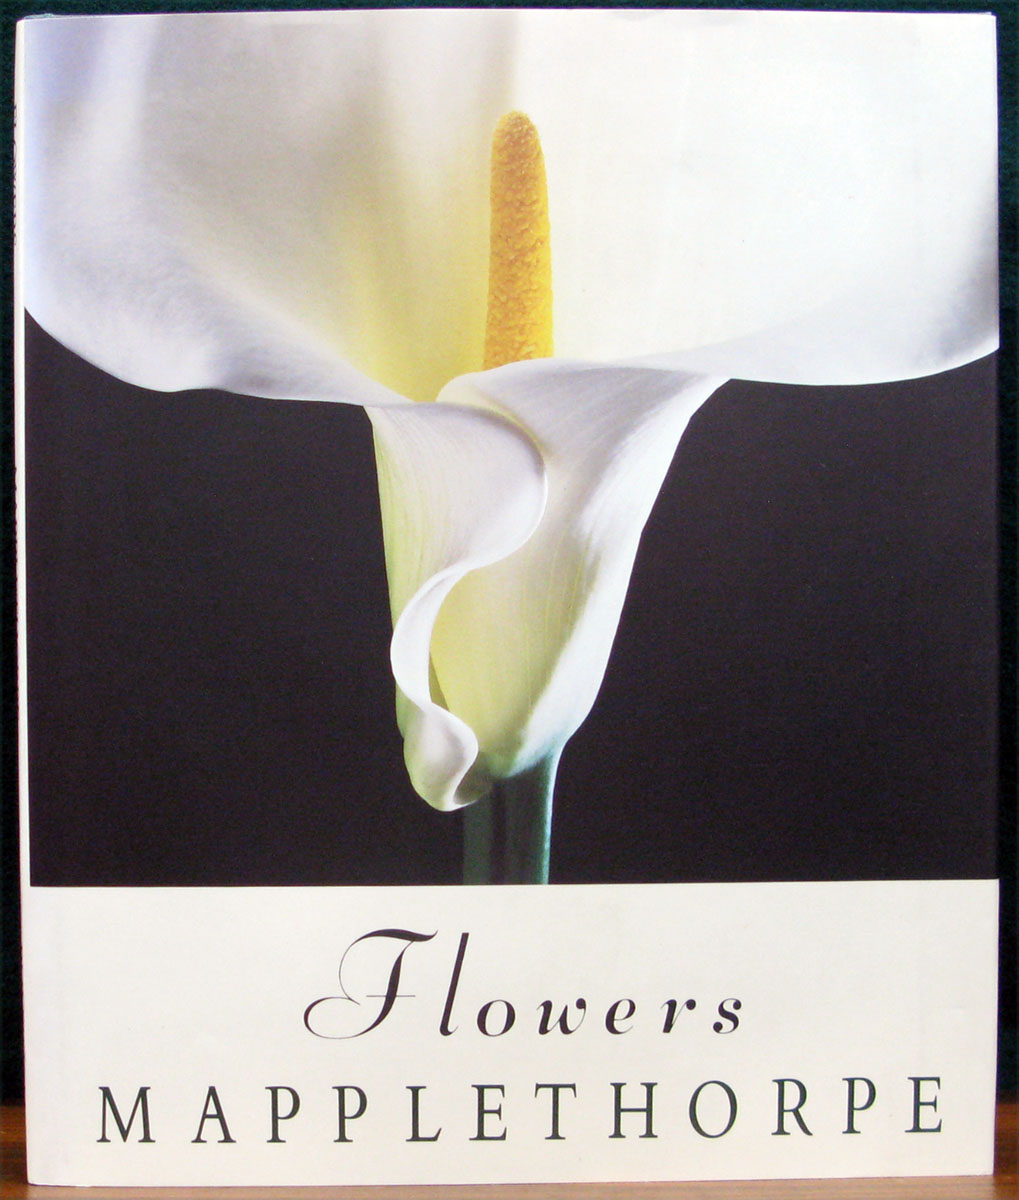 FLOWERS. Foreword by Patti Smith. - MAPPLETHORPE, Robert.